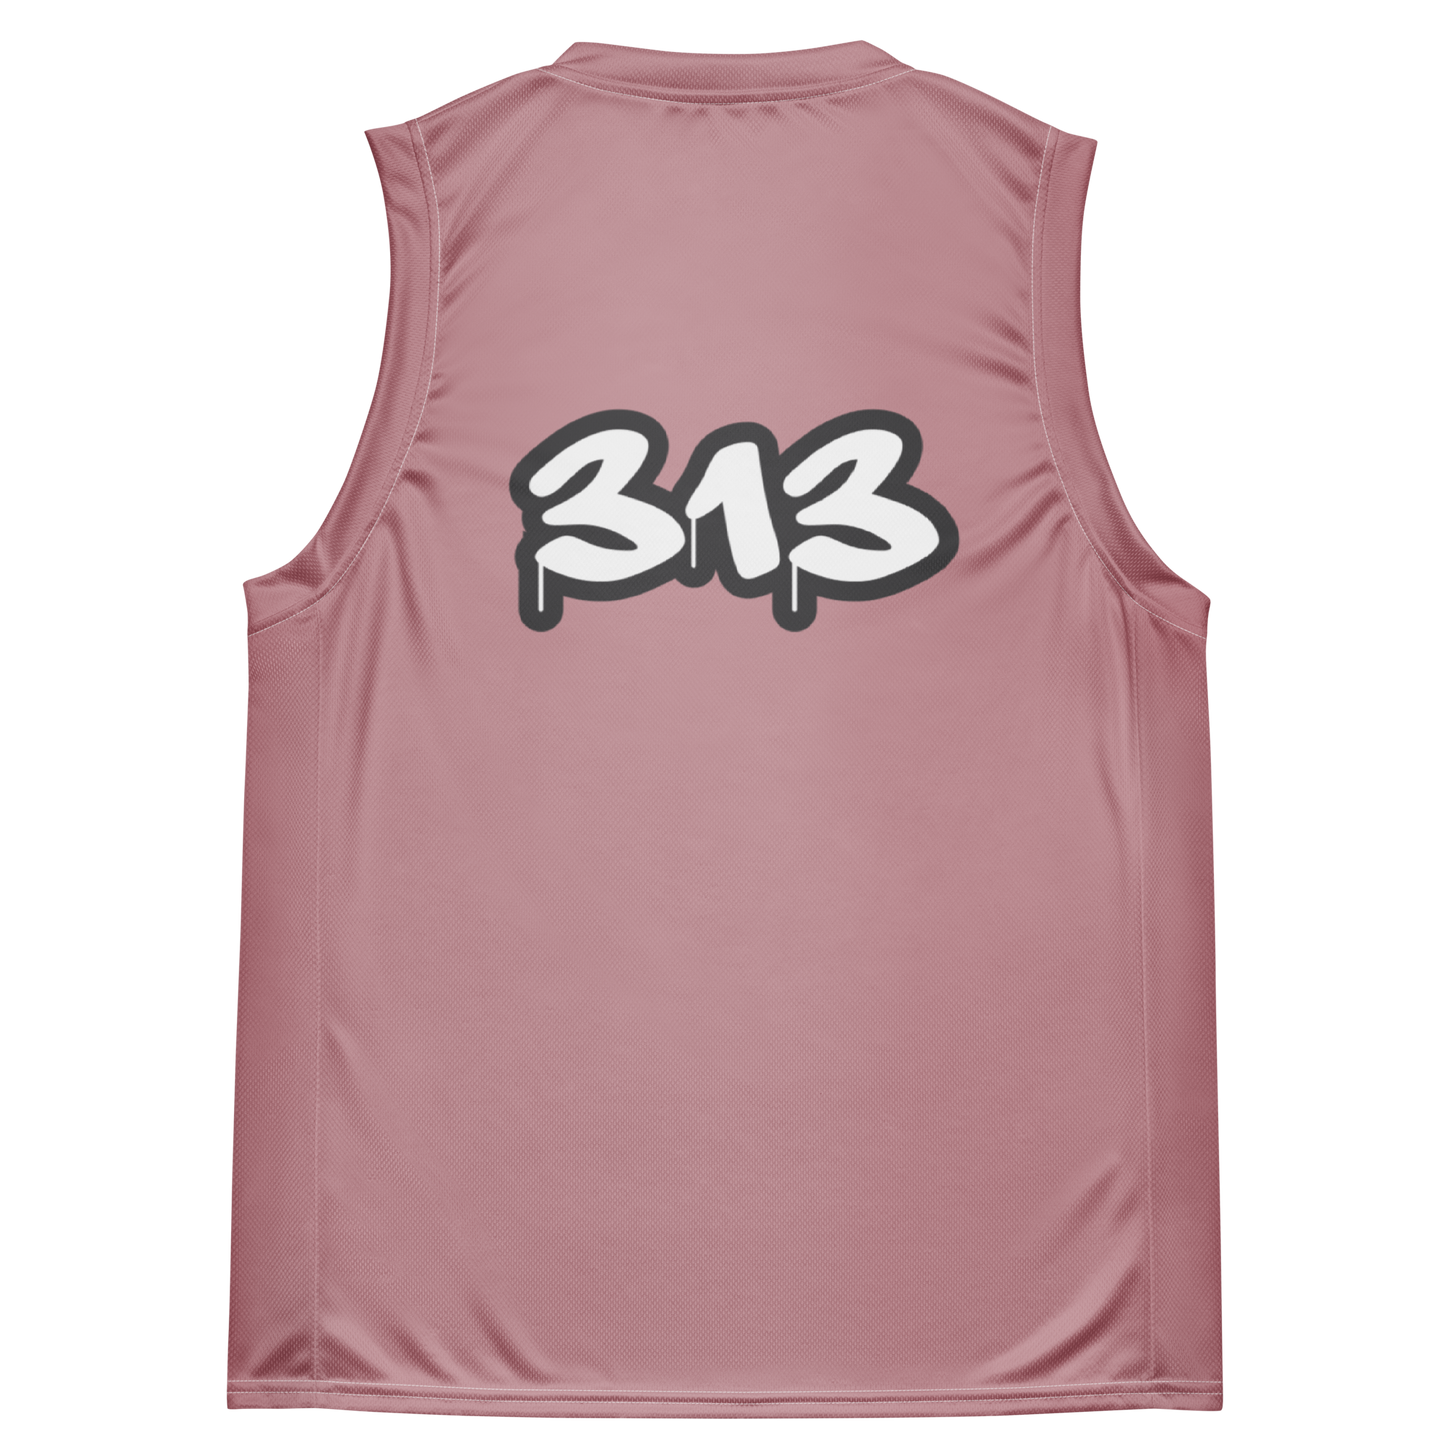 'Detroit 313' Basketball Jersey (Tag Edition) | Unisex - Cherry Blossom Pink